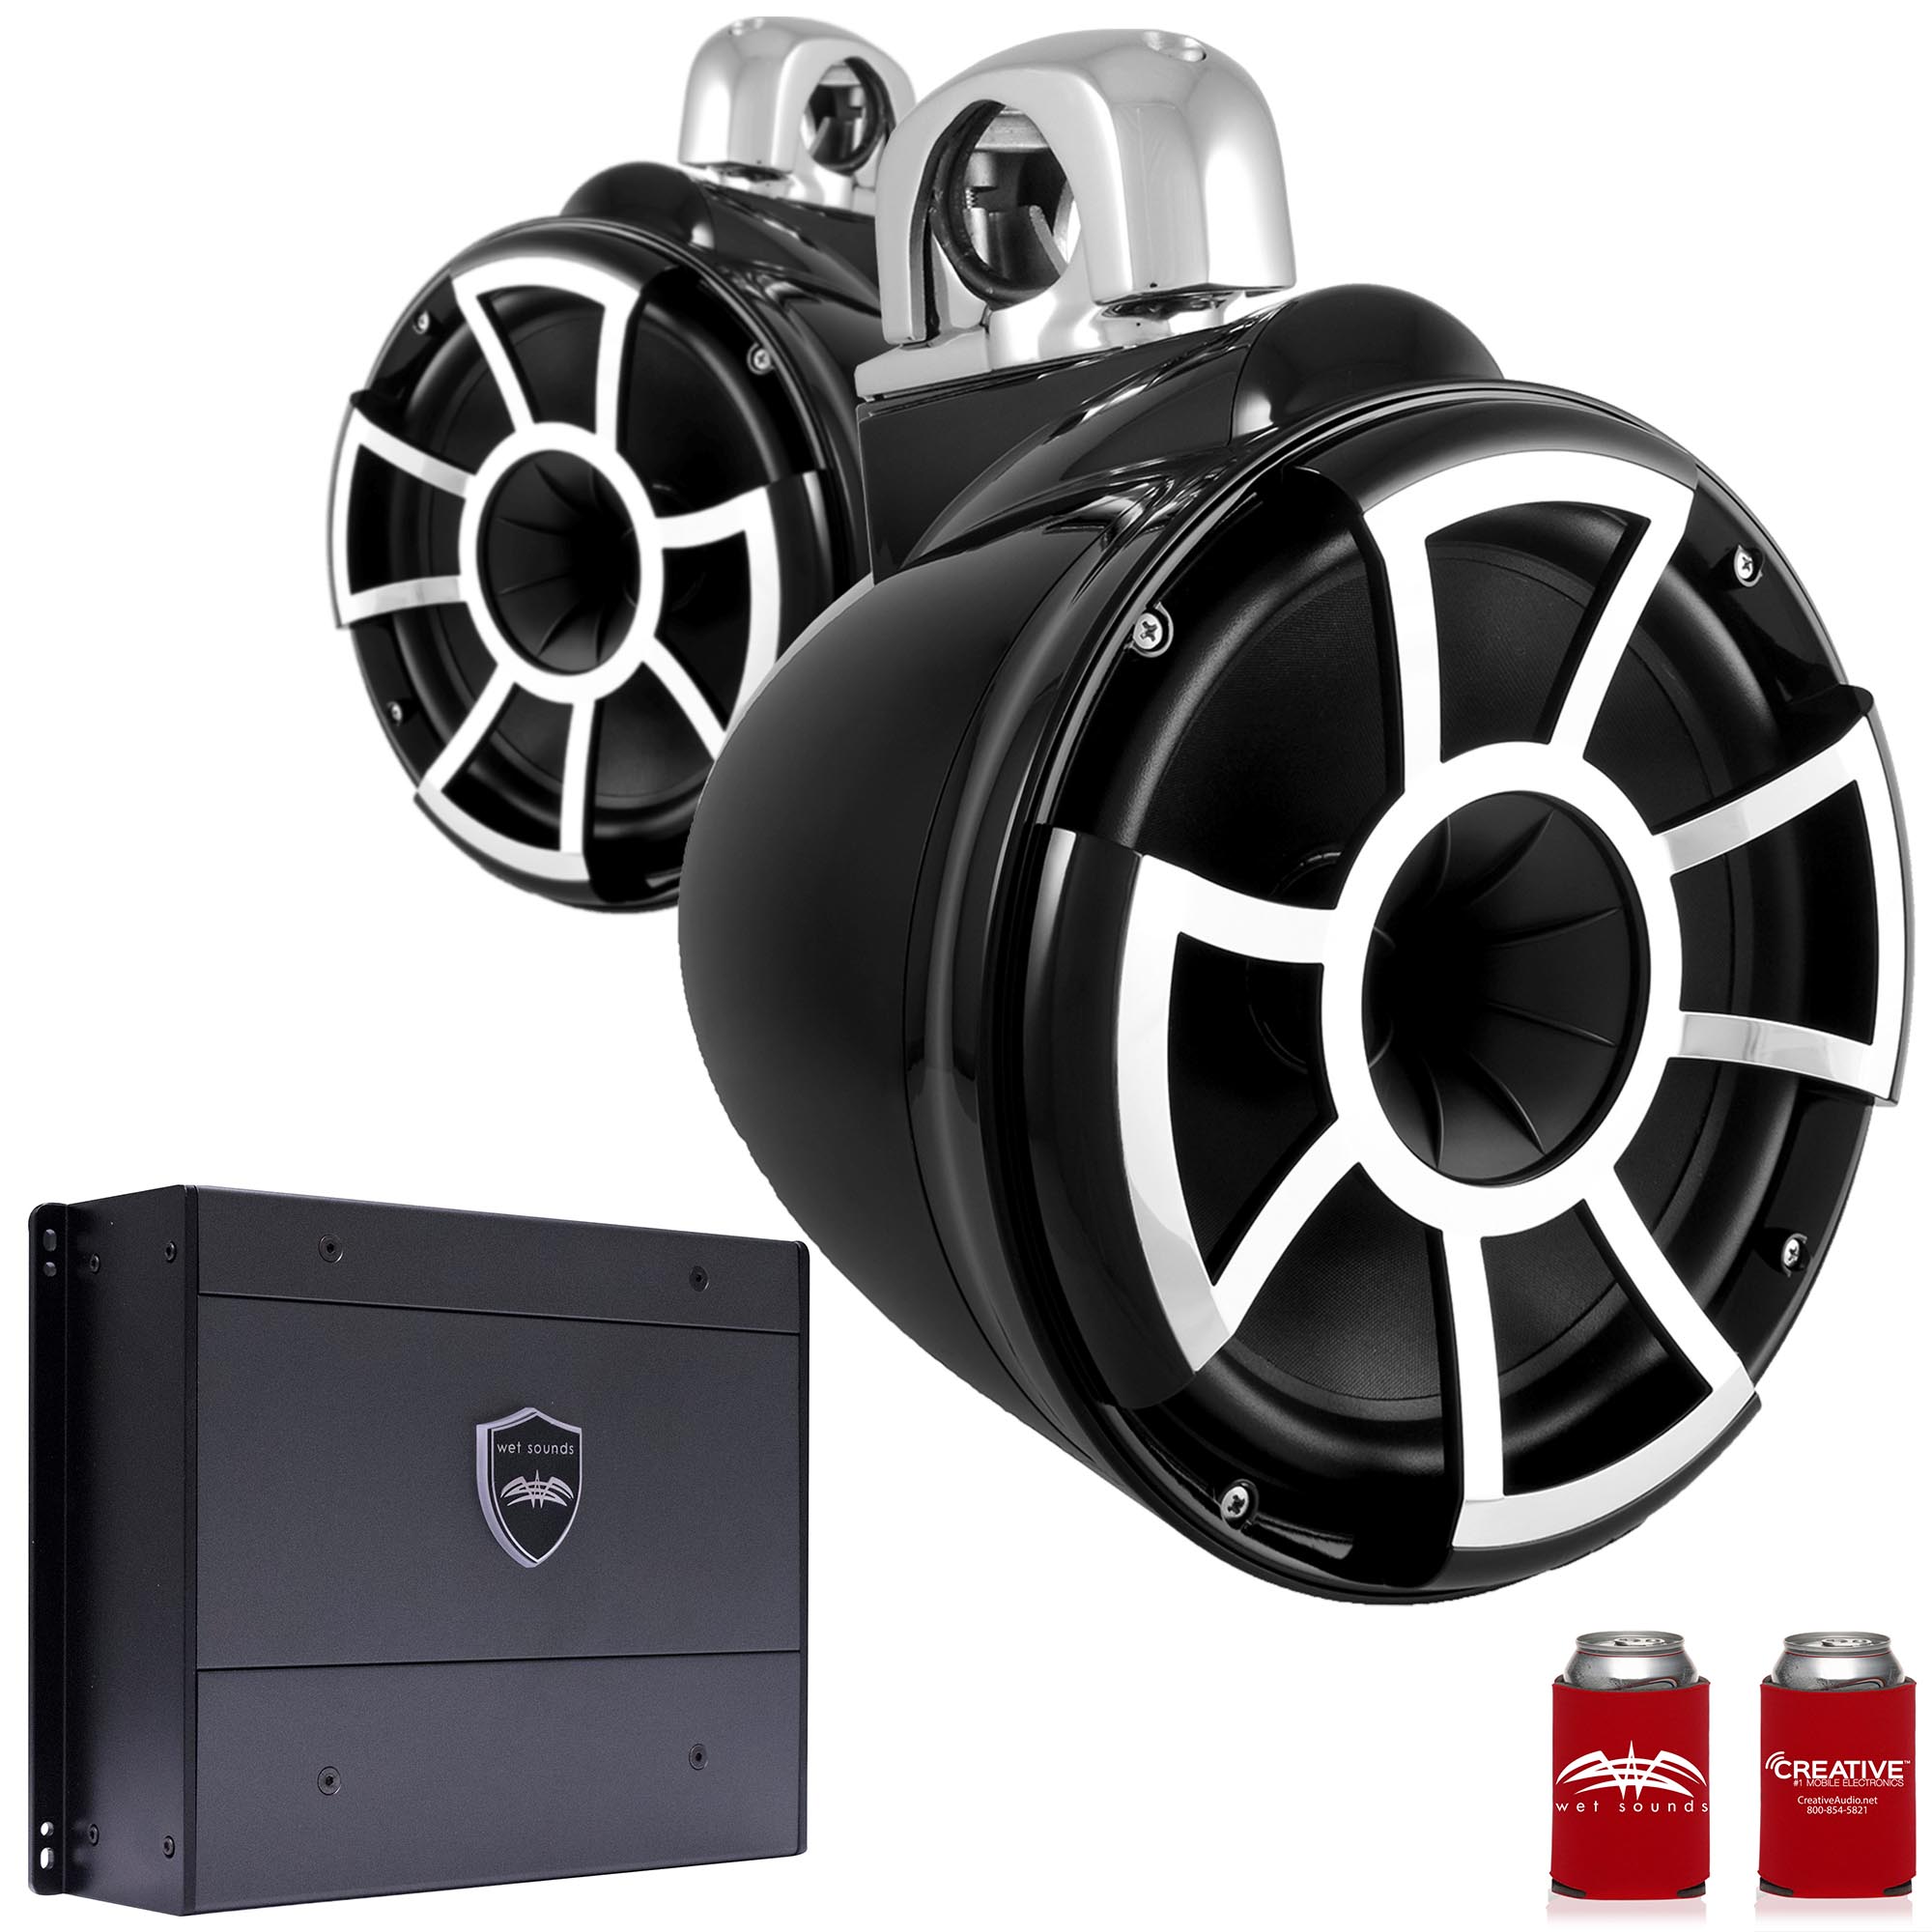 Wet Sounds REV10B-FC 10" Black Tower Speakers with Stainless Steel Fixed Clamps & SYN-DX4 800 Watt Amplifier